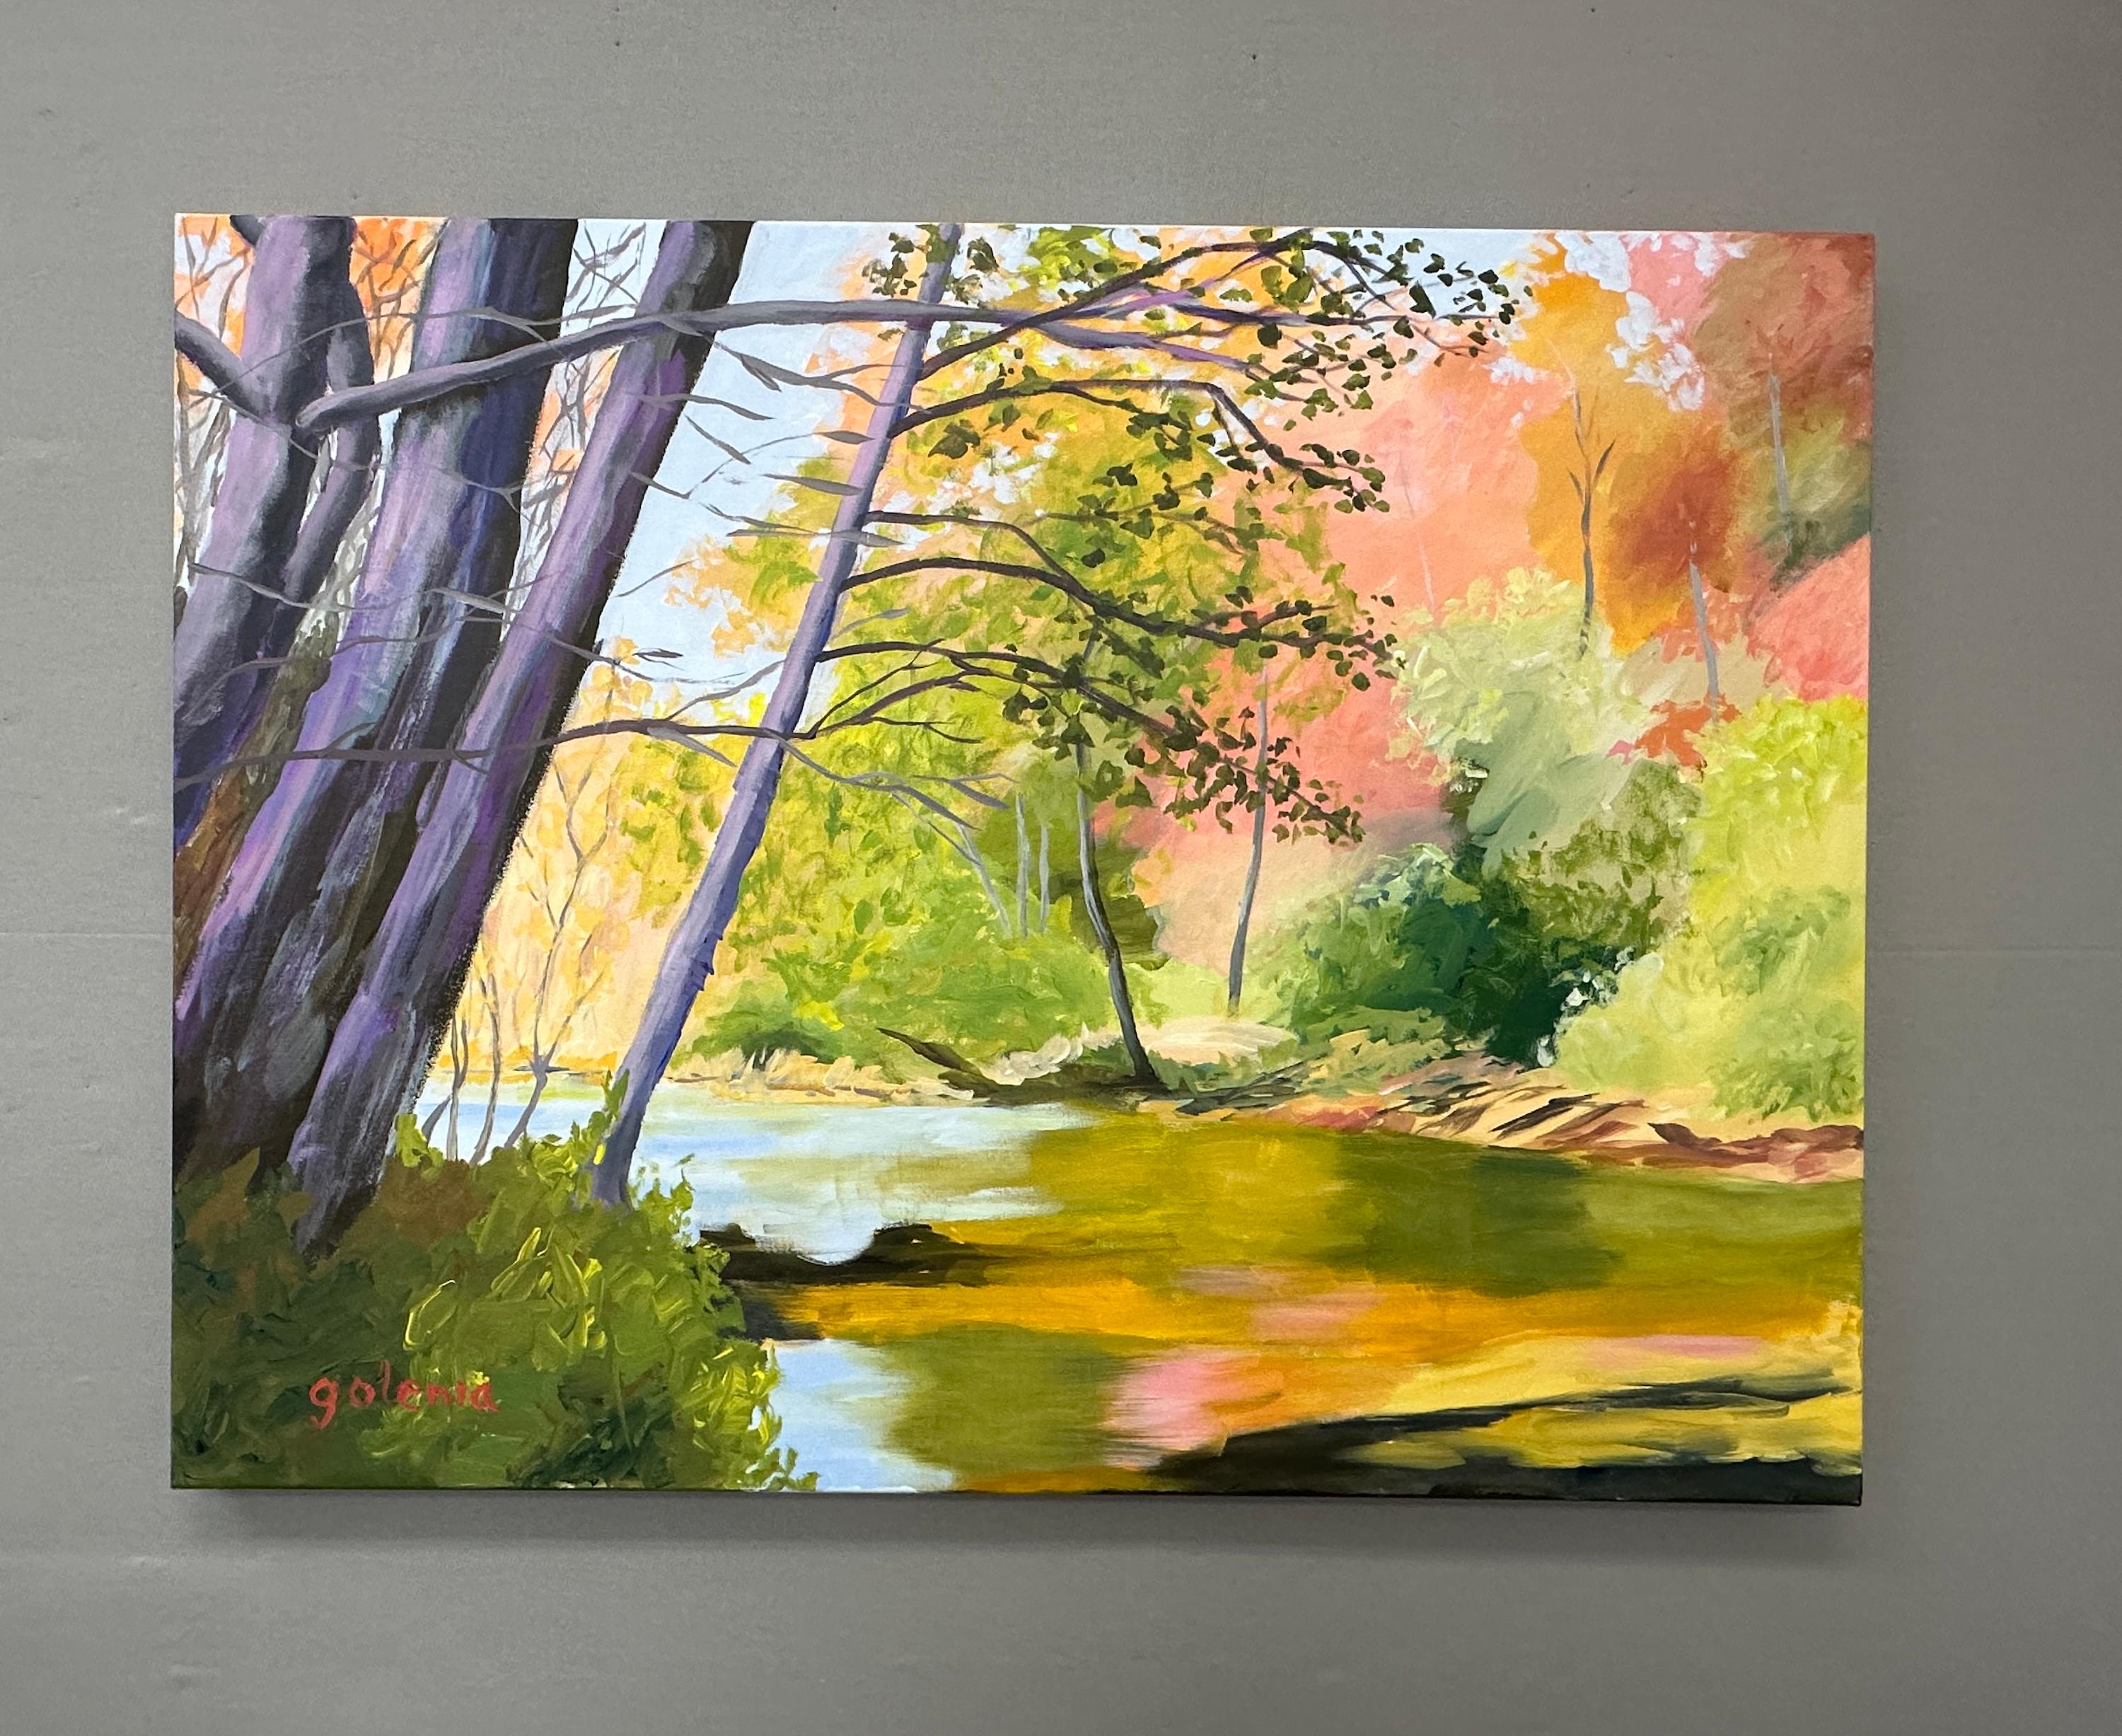 <p>Artist Comments<br>Early morning sunlight brings out the soft colors of fall. Riverside trees cast a soothing shadow onto the water that reflects their vibrant hues. The stillness of the surroundings evokes a sense of